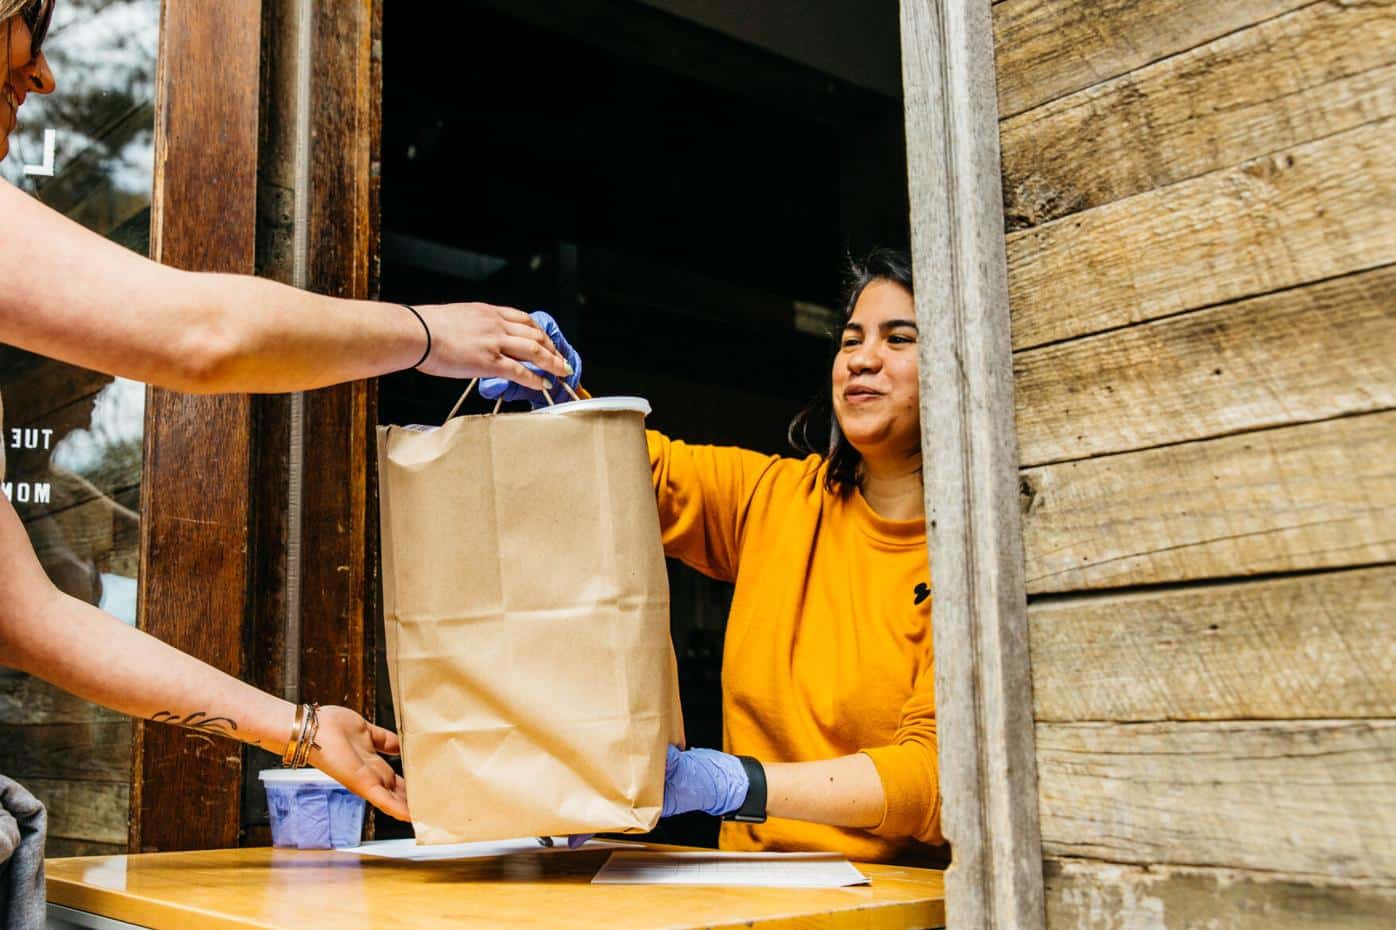 Delivering 20,000 meals by the end of October to families in need